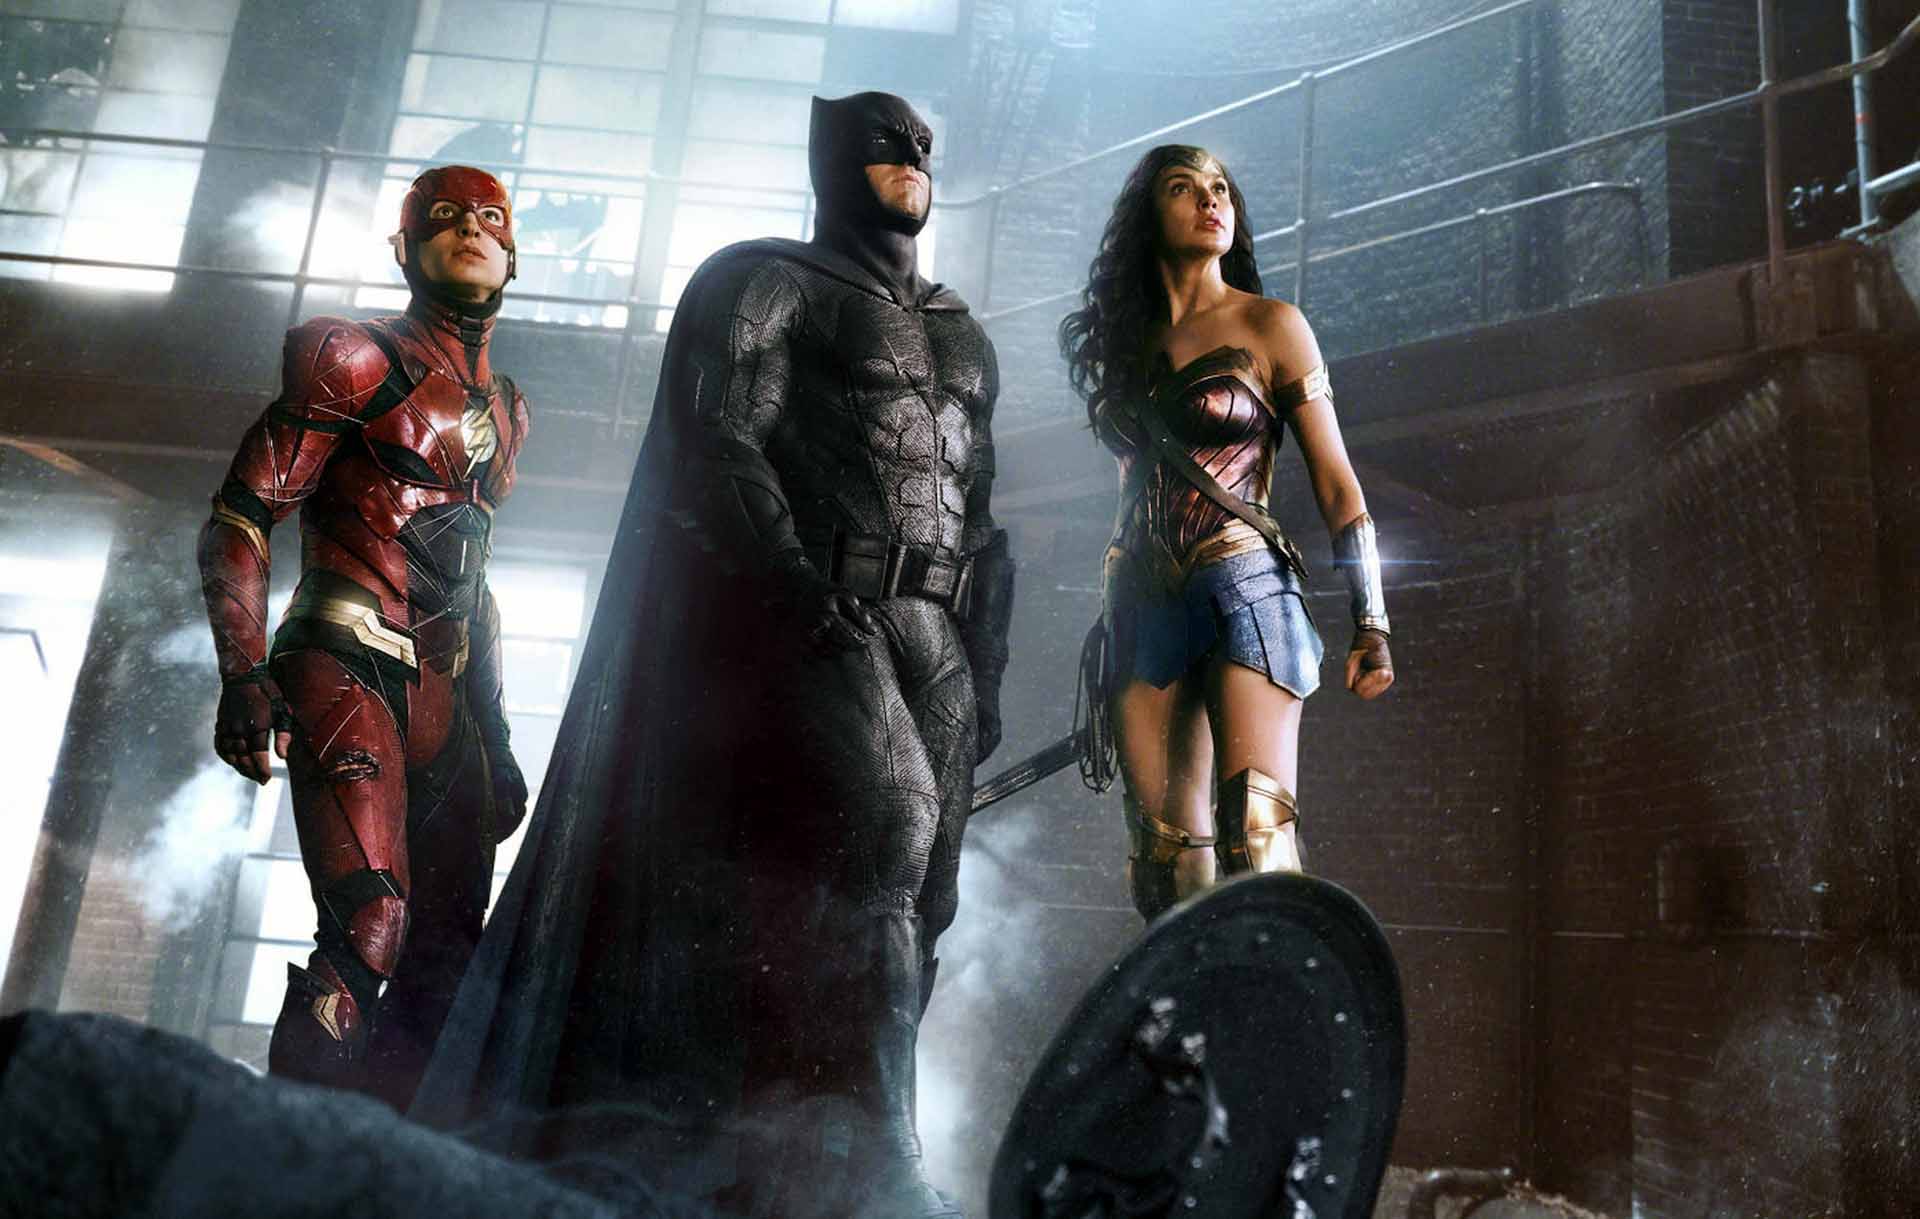 Justice League is an upcoming American superhero film based on the DC Comics superhero team of the same name, distributed by Warner Bros. Pictures. It is intended to be the fifth installment in the DC Extended Universe. This photograph is for editorial